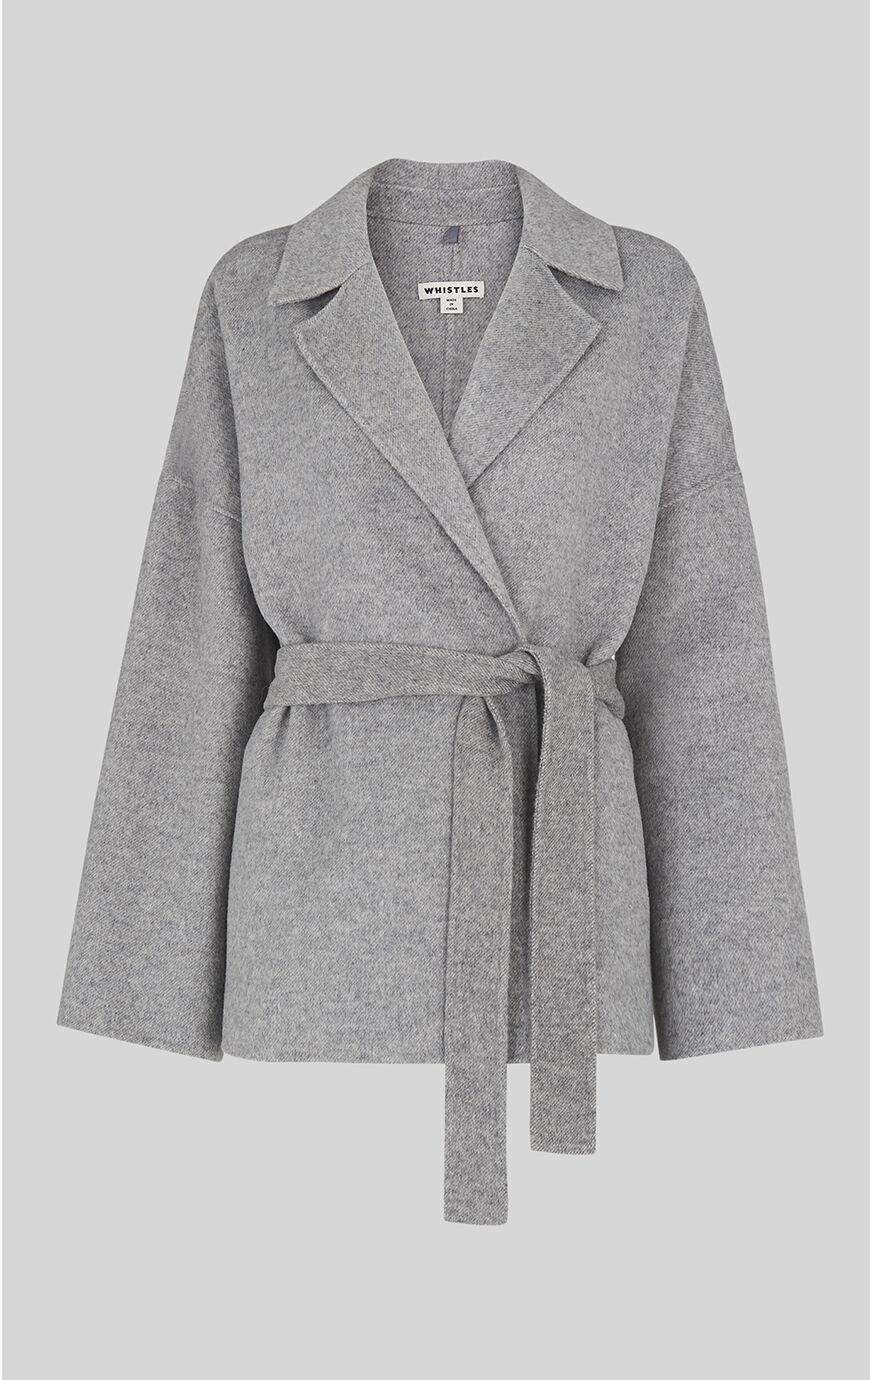 Whistles Belted Short Wrap Coat in Gray | Lyst